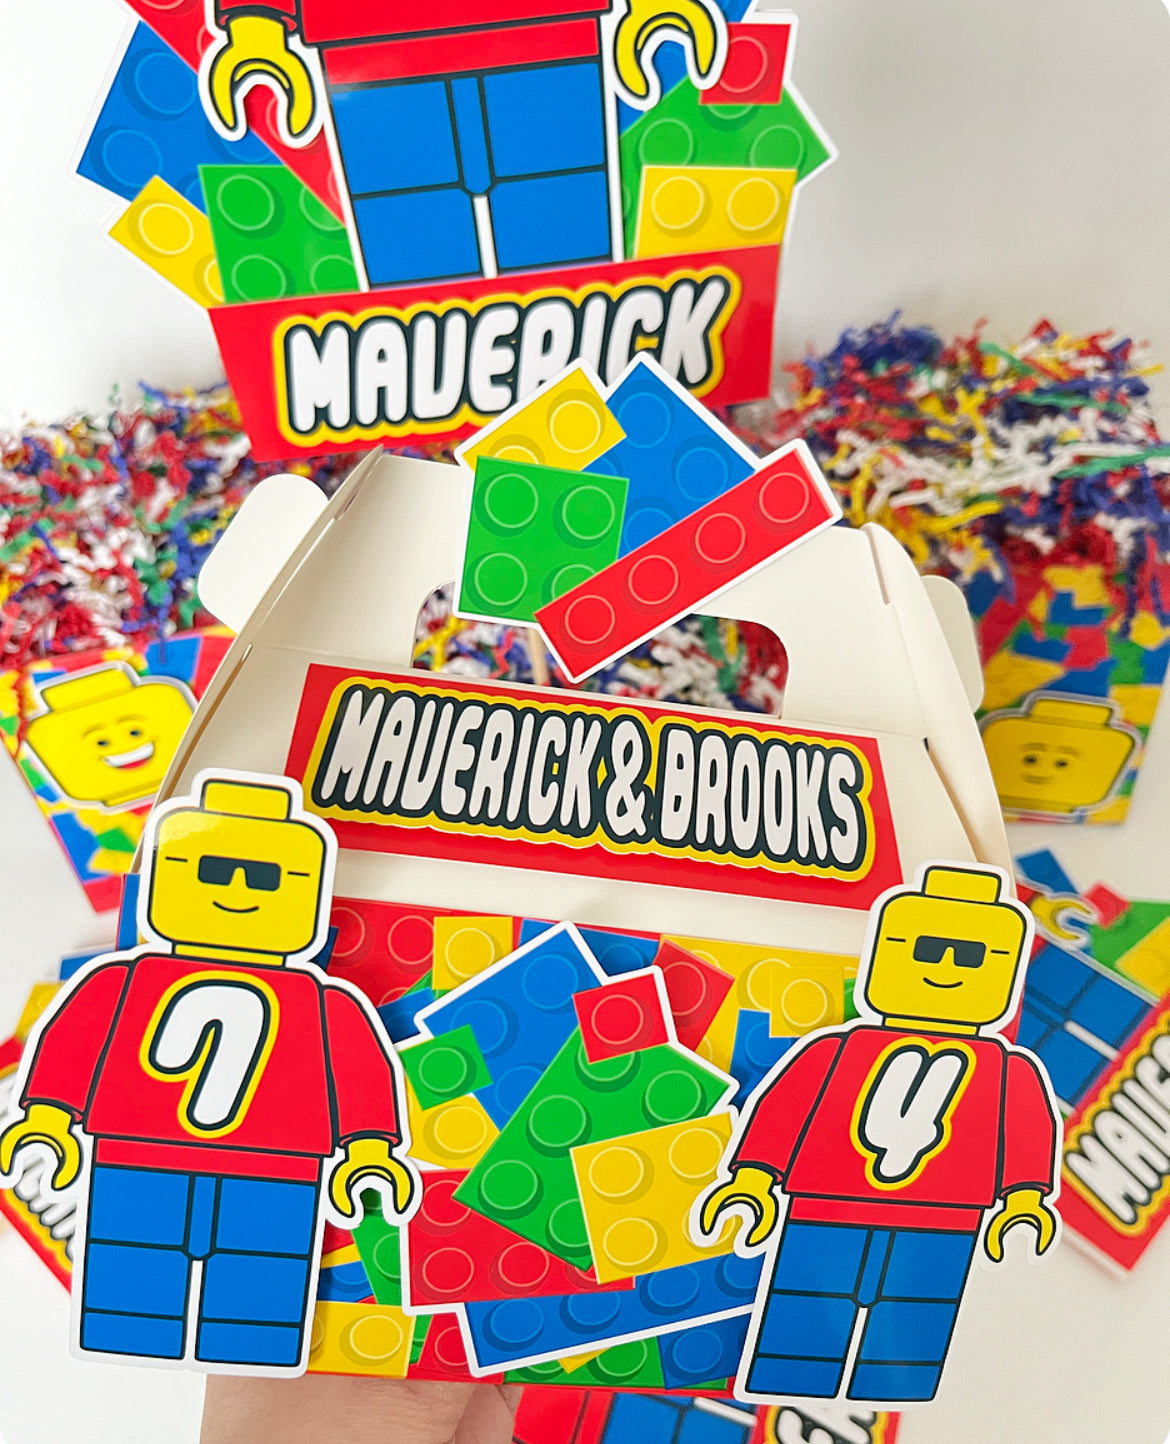 Lego themed Party Decorations